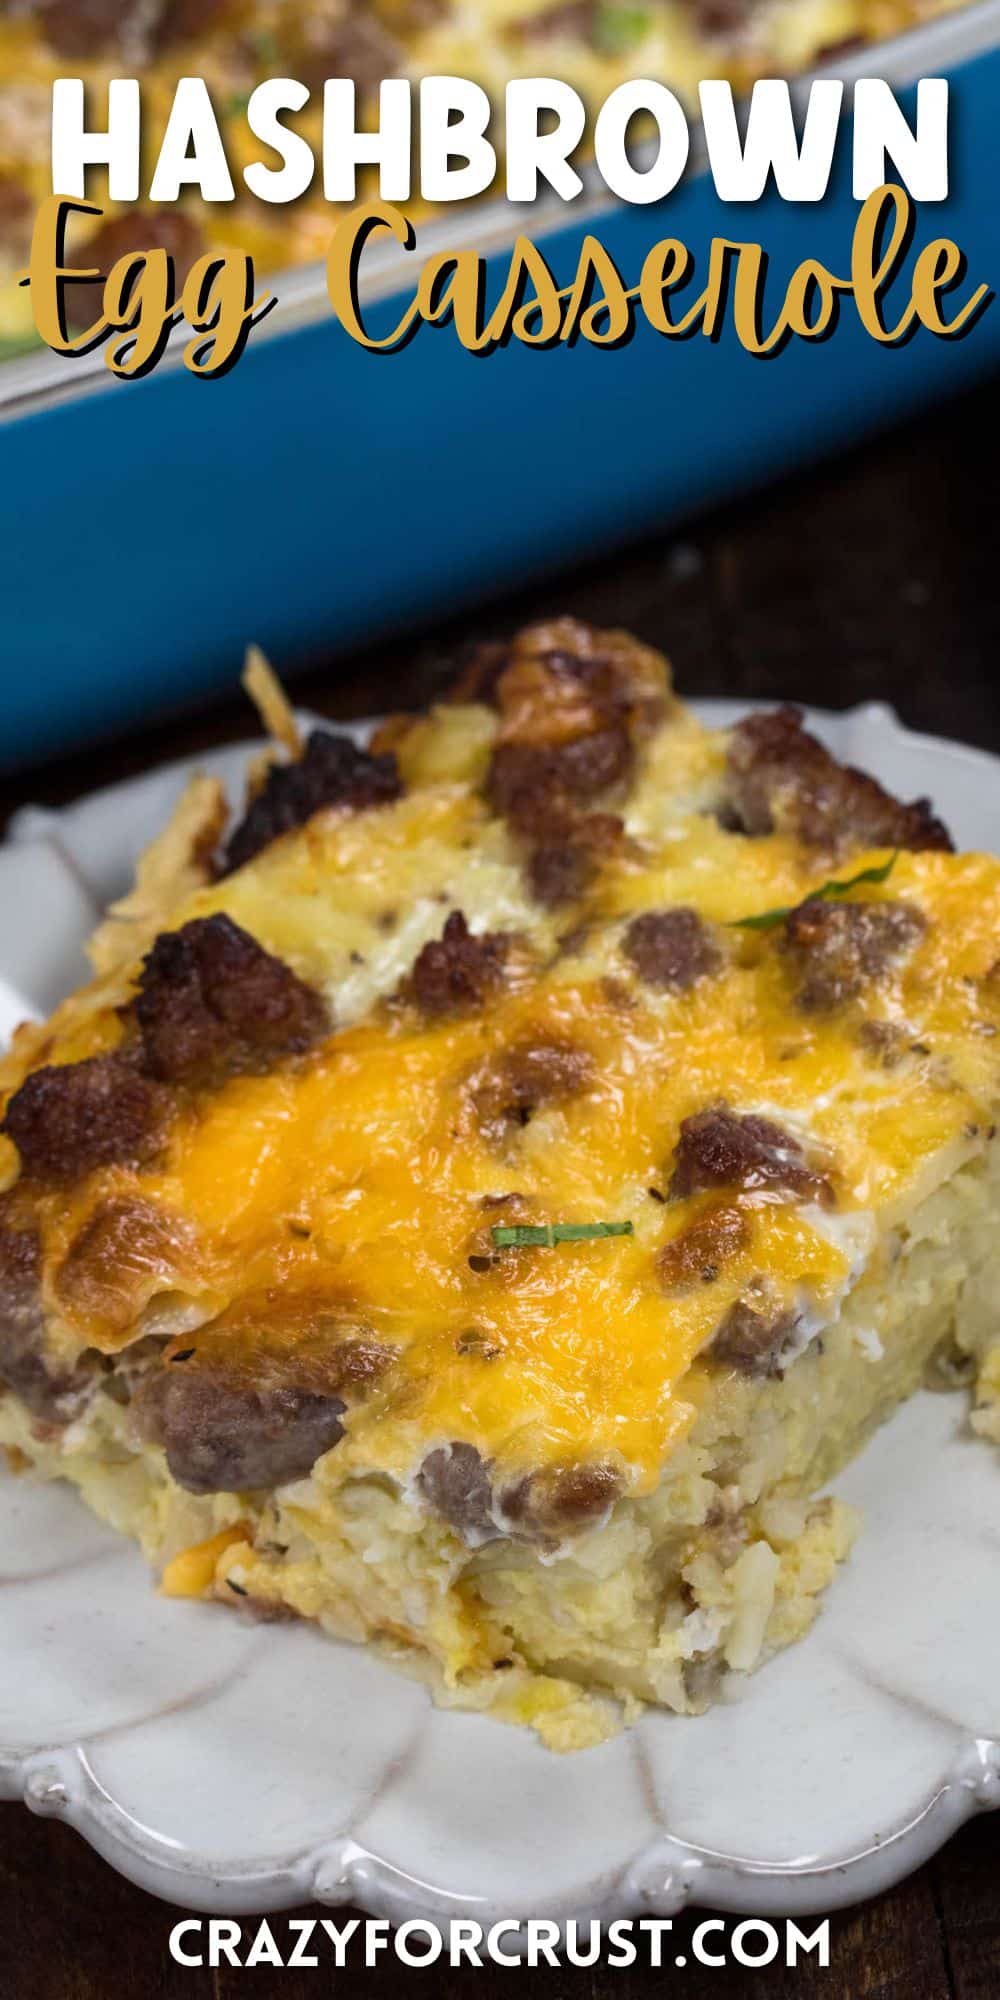 Breakfast Casserole - Once Upon a Chef